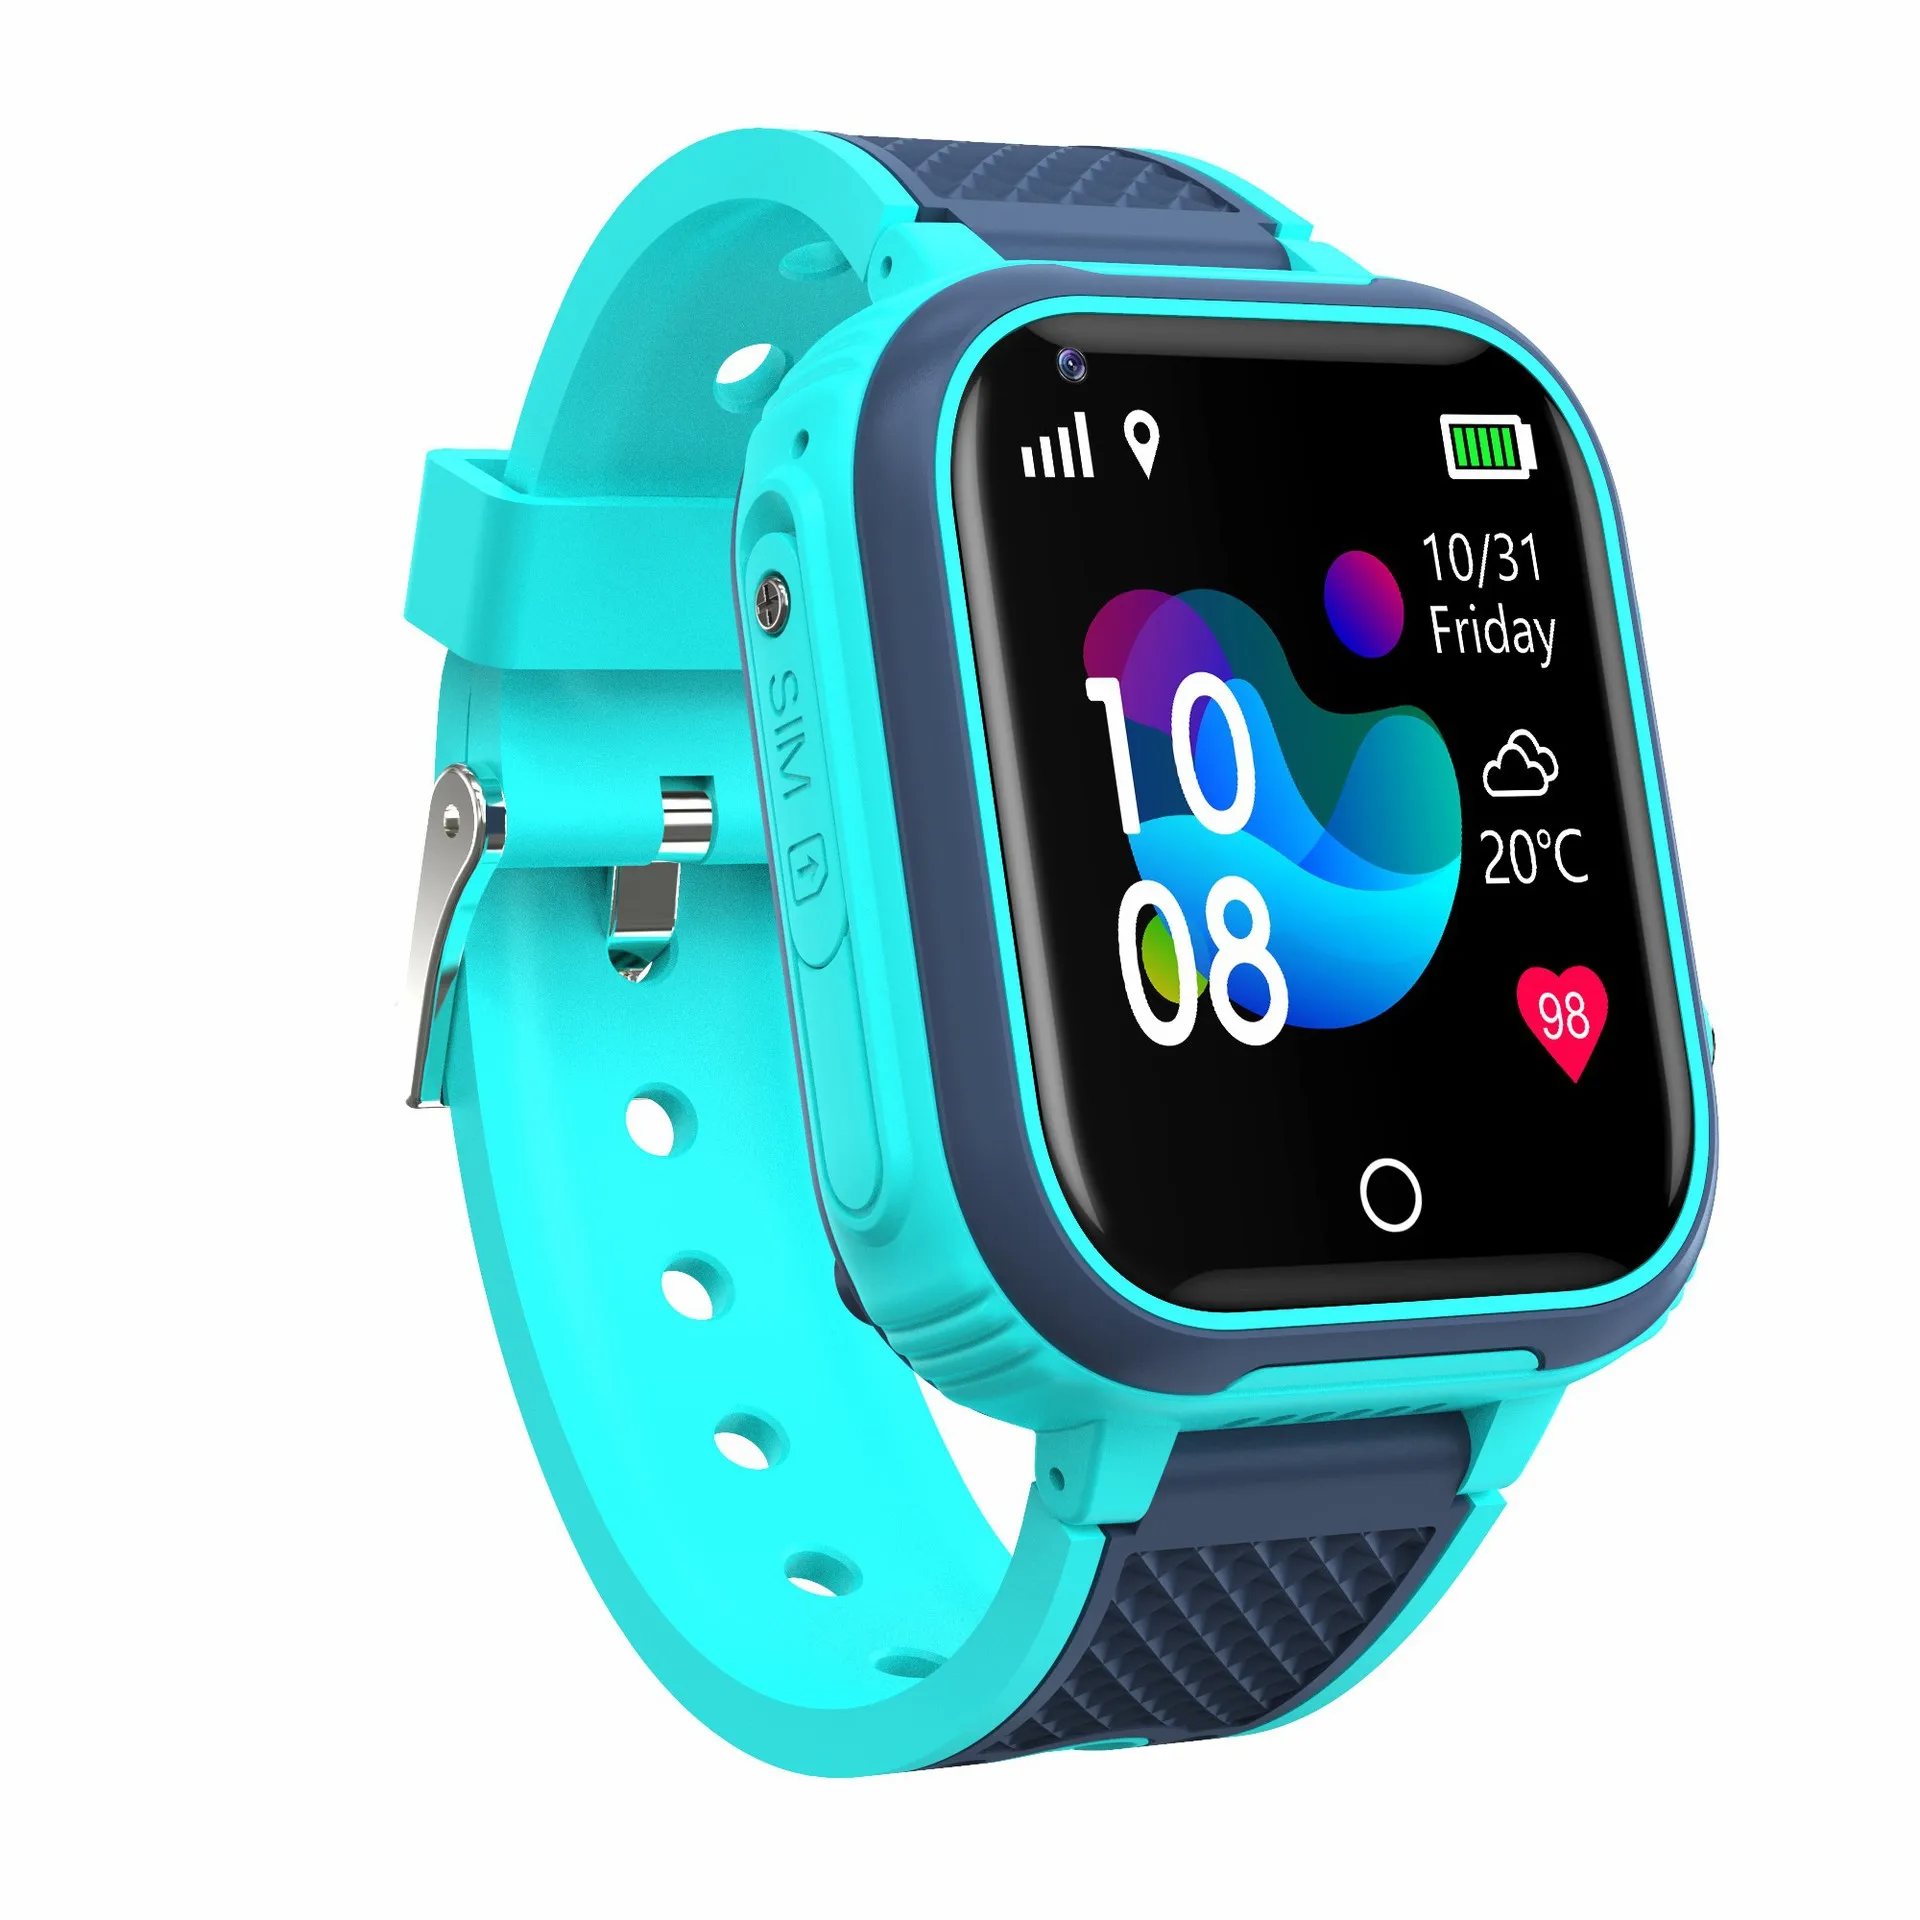 

Ultimate 4G Smartwatch for Kids - The Perfect GPS Tracker and Phone Watch Combo for Elementary Schoolers